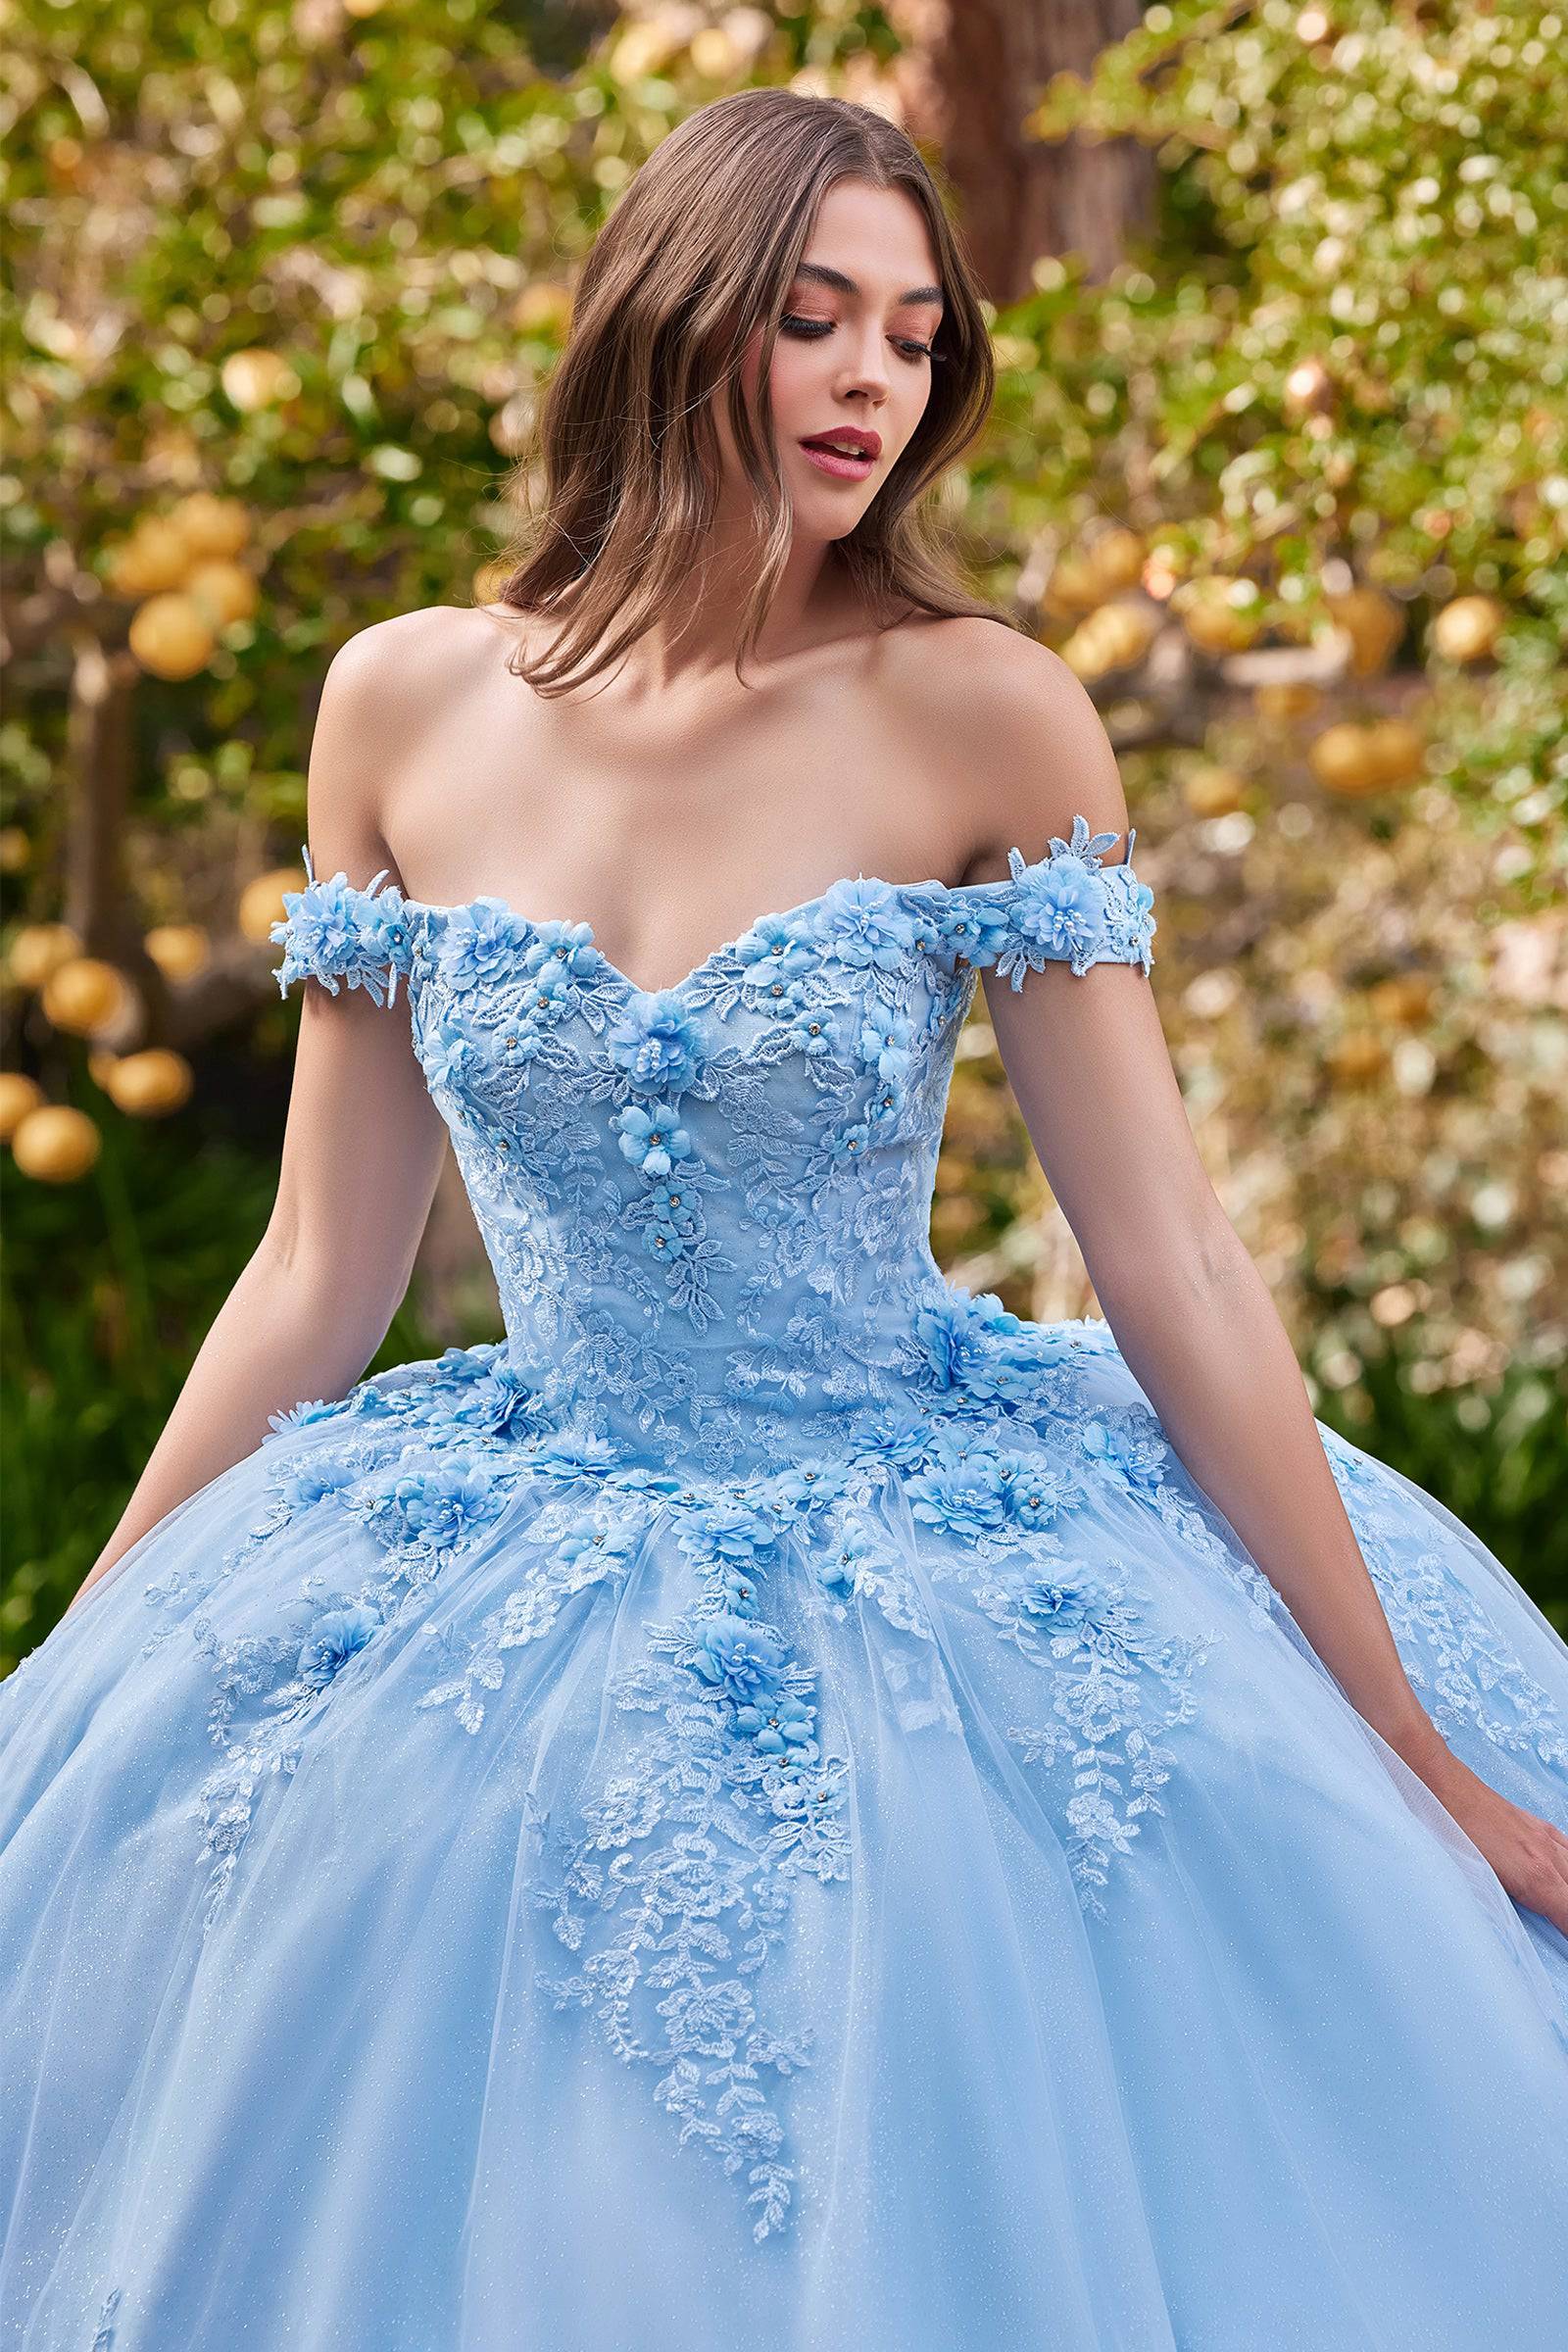 Fiesta Quinceanera 56445 VIP Fashion Prom & Quince Dress Superstore